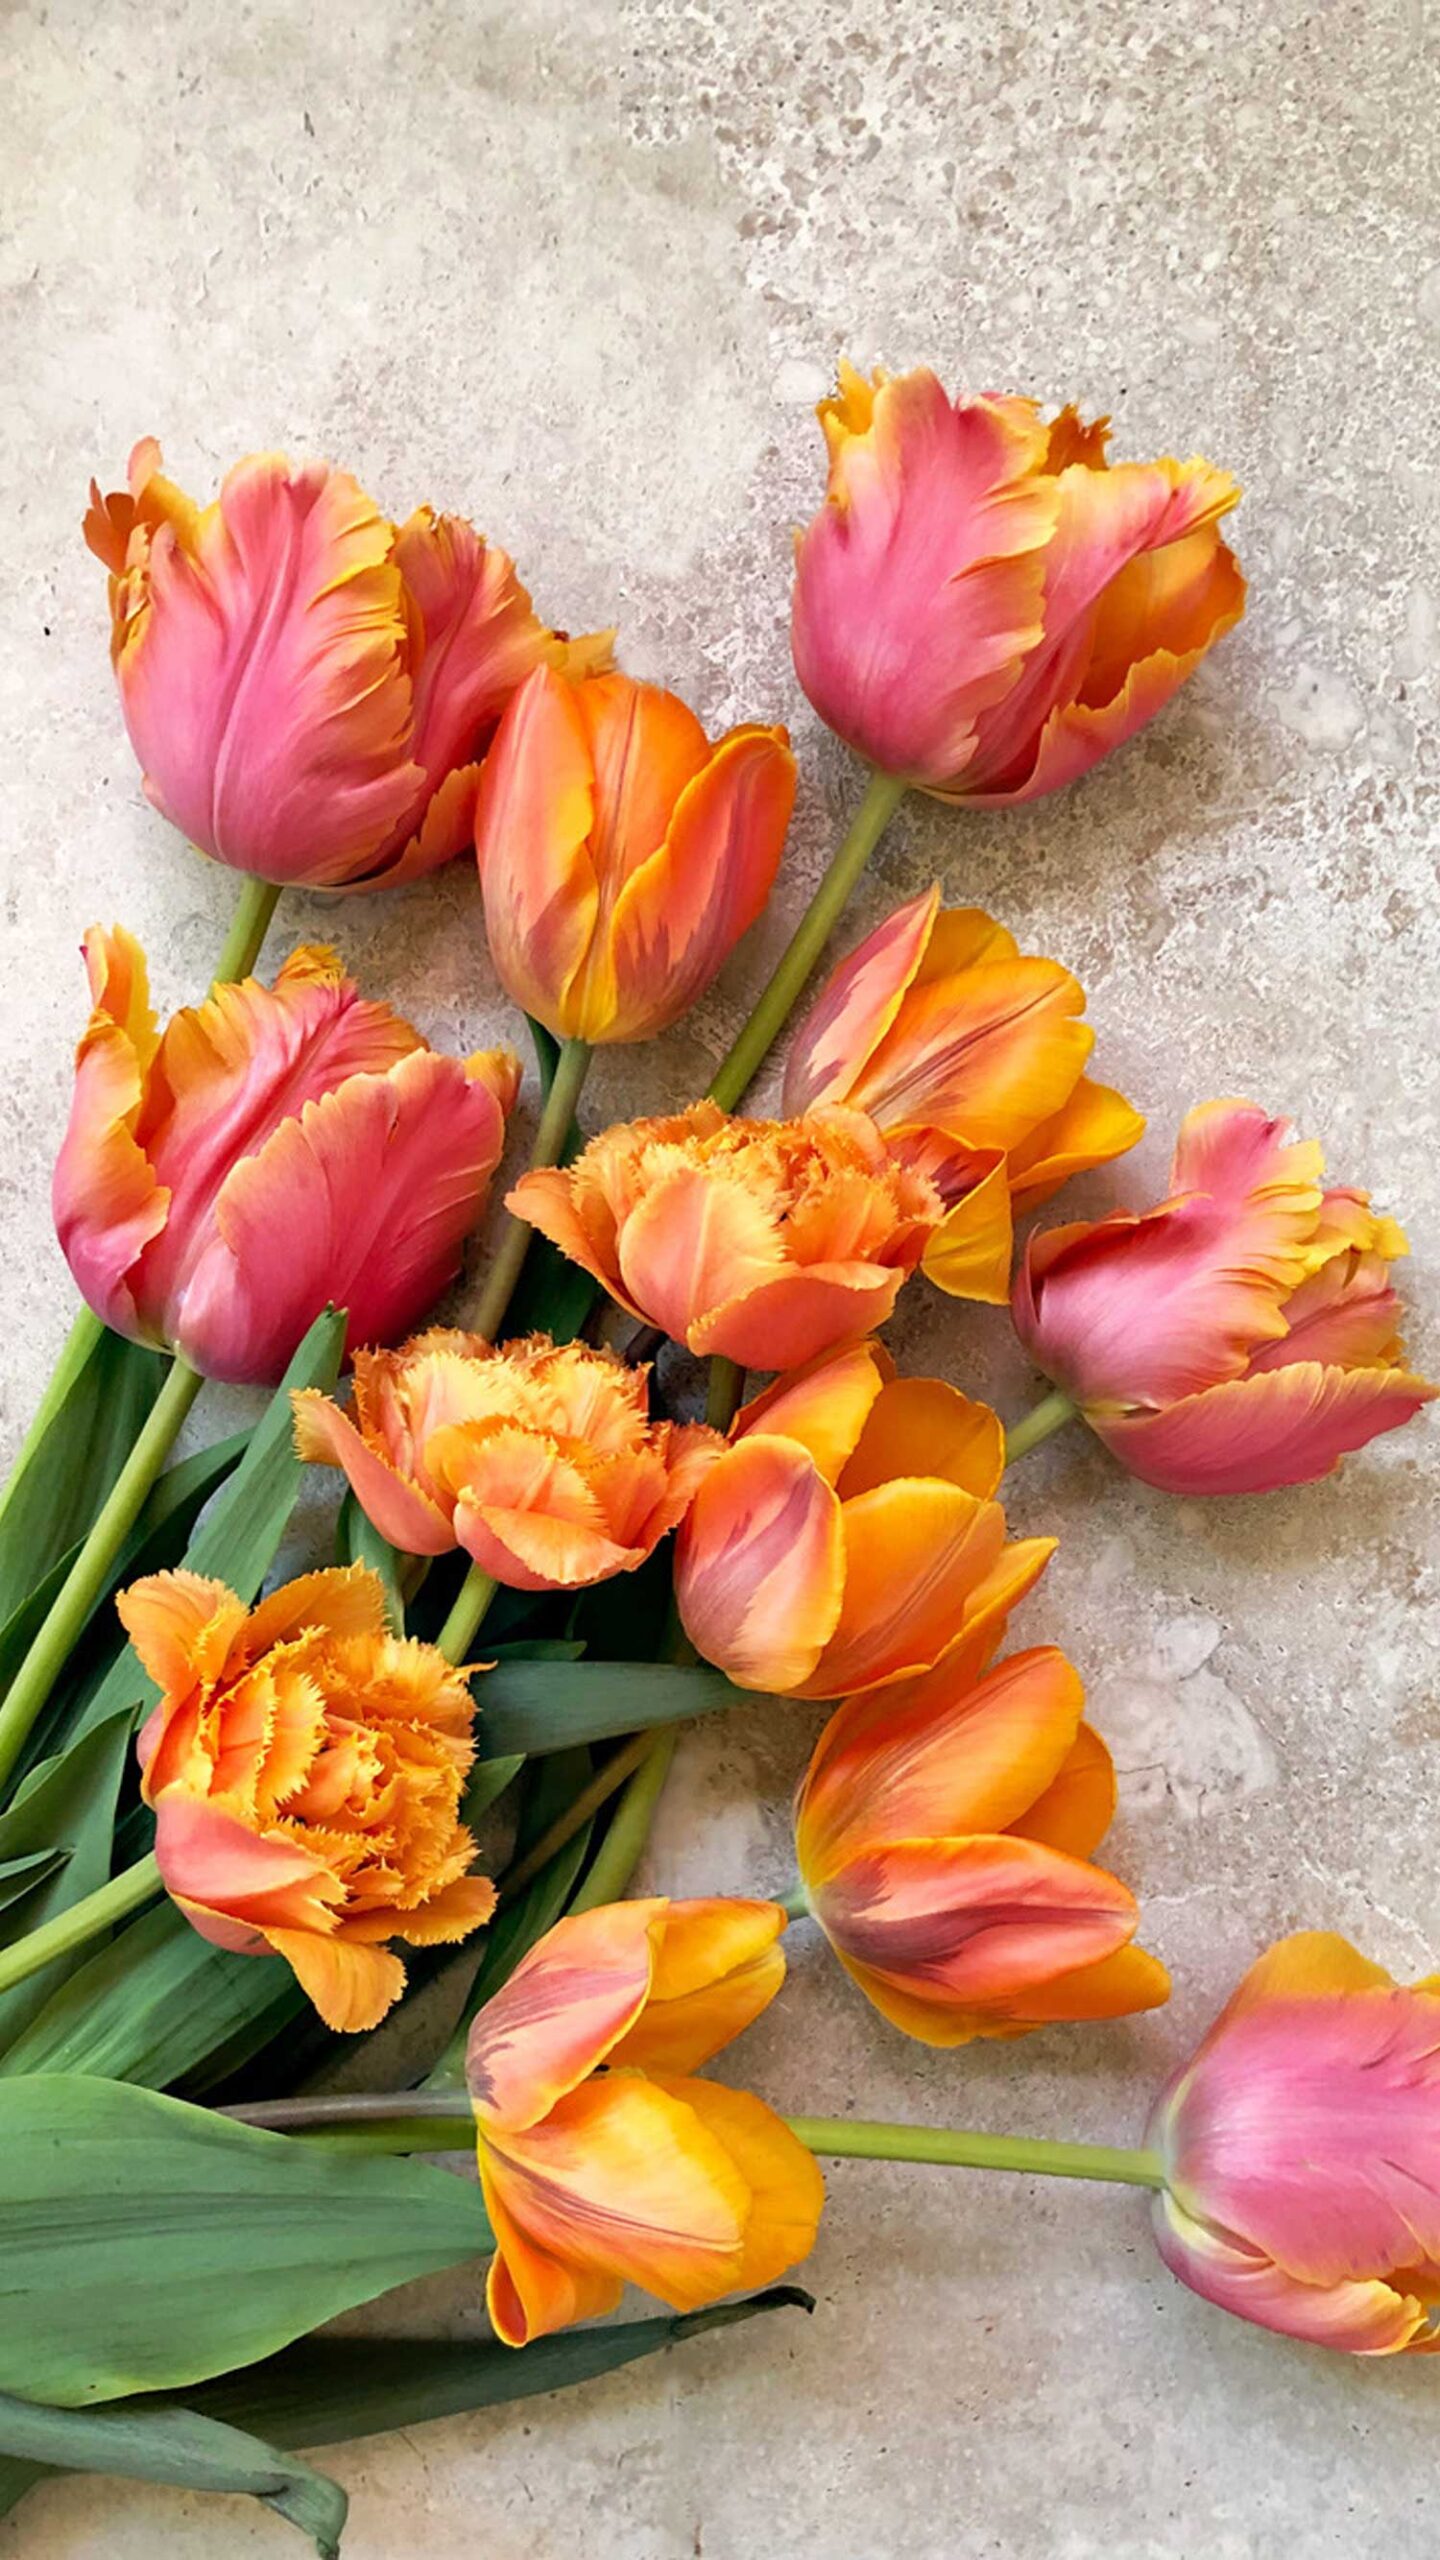 A stone background with Amazing Parrot Tulips, Sensual Touch Double Fringed Tulips, and Princess Irene Tulips In Apricot, Pink & Orange.